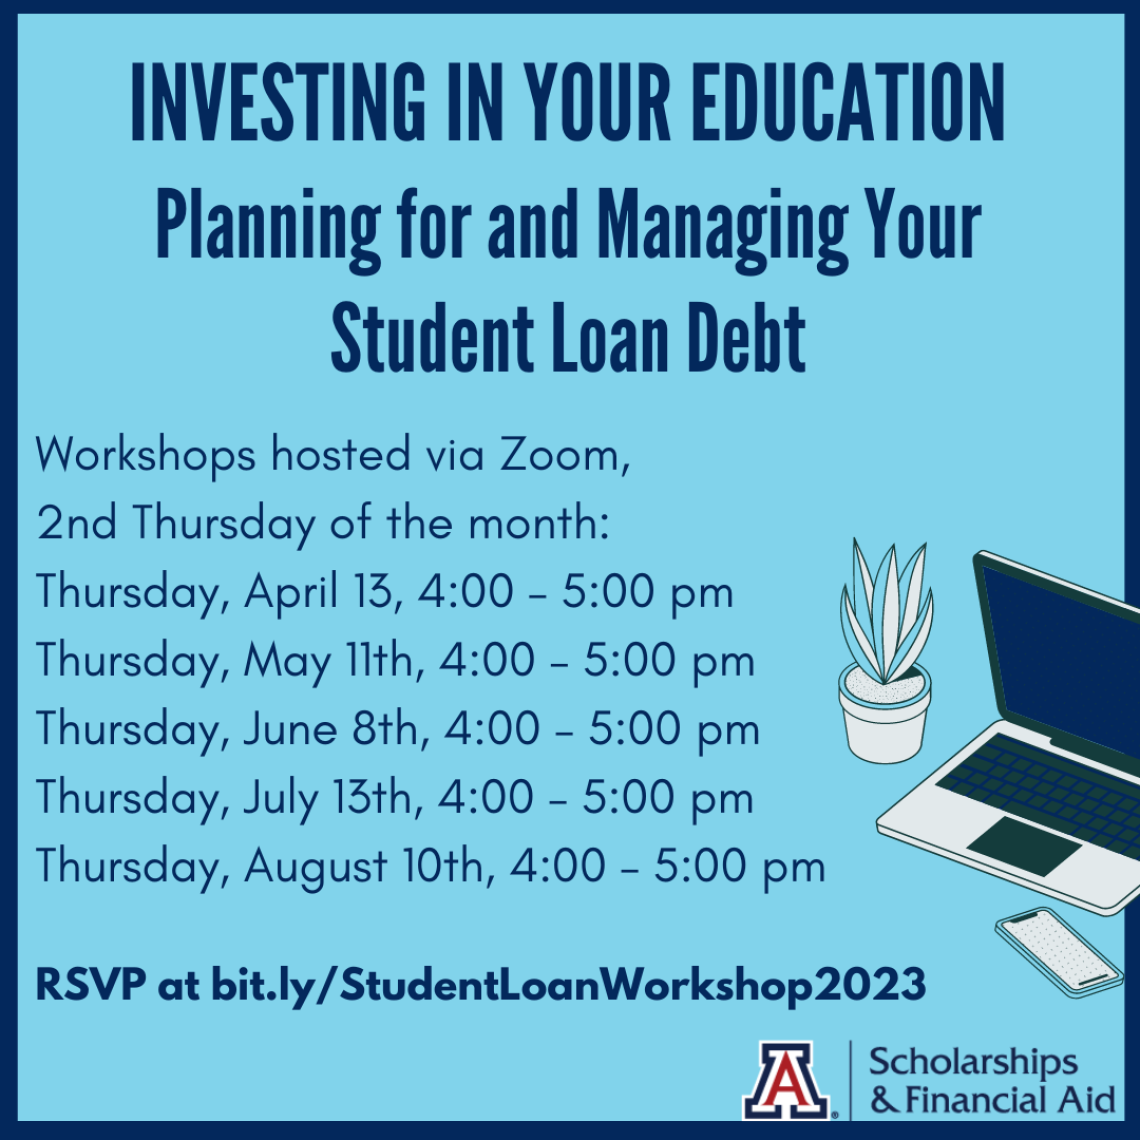 Investing in your education workshop flyer